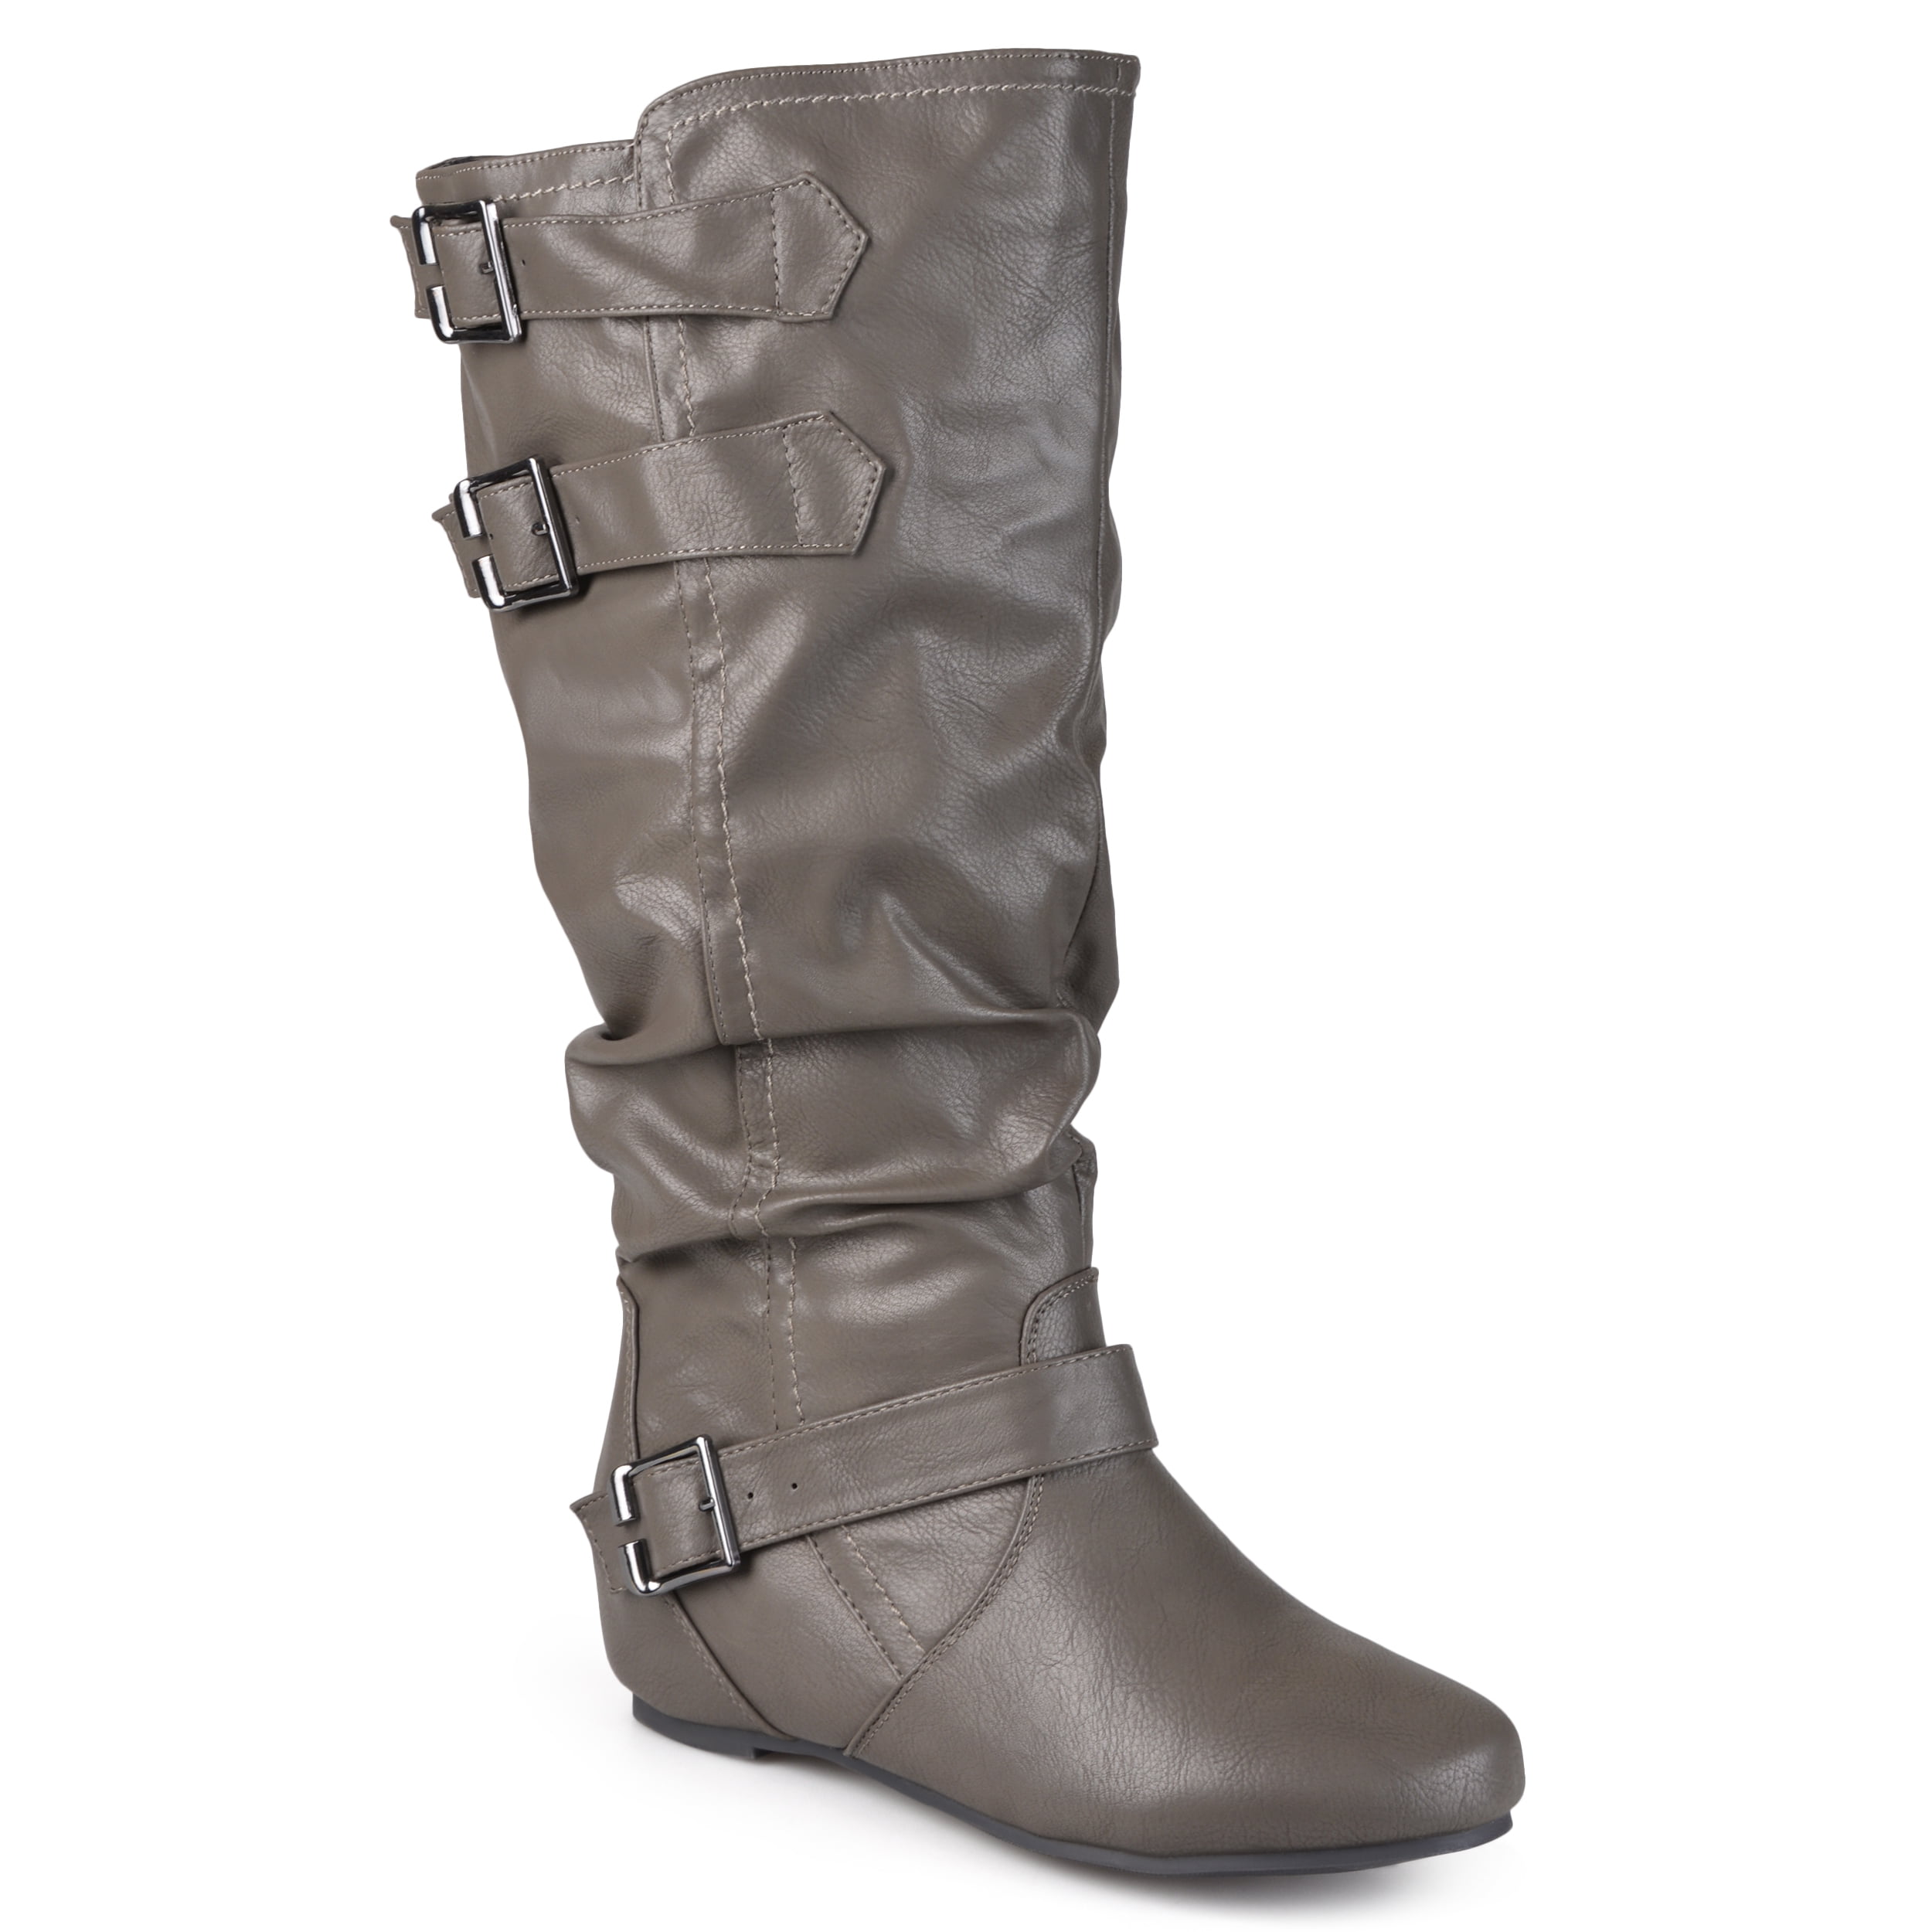 Brinley Co. Women's Extra Wide Calf Buckle Slouch Low-wedge Boots ...